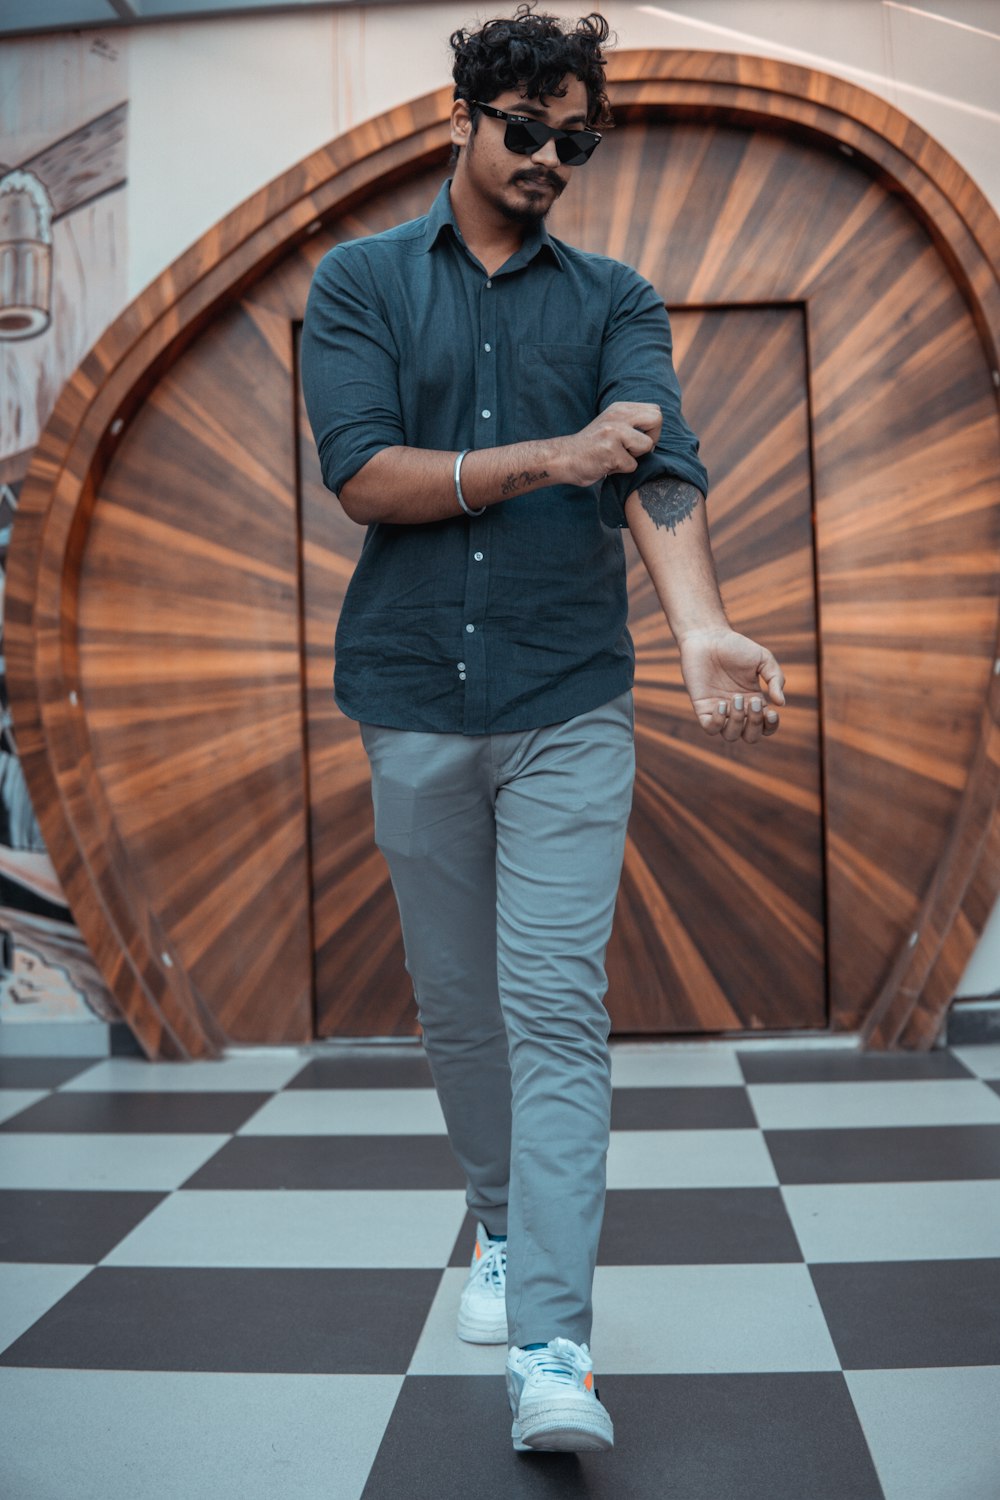 man in black dress shirt and gray pants standing on brown wooden floor  photo – Free Grey Image on Unsplash